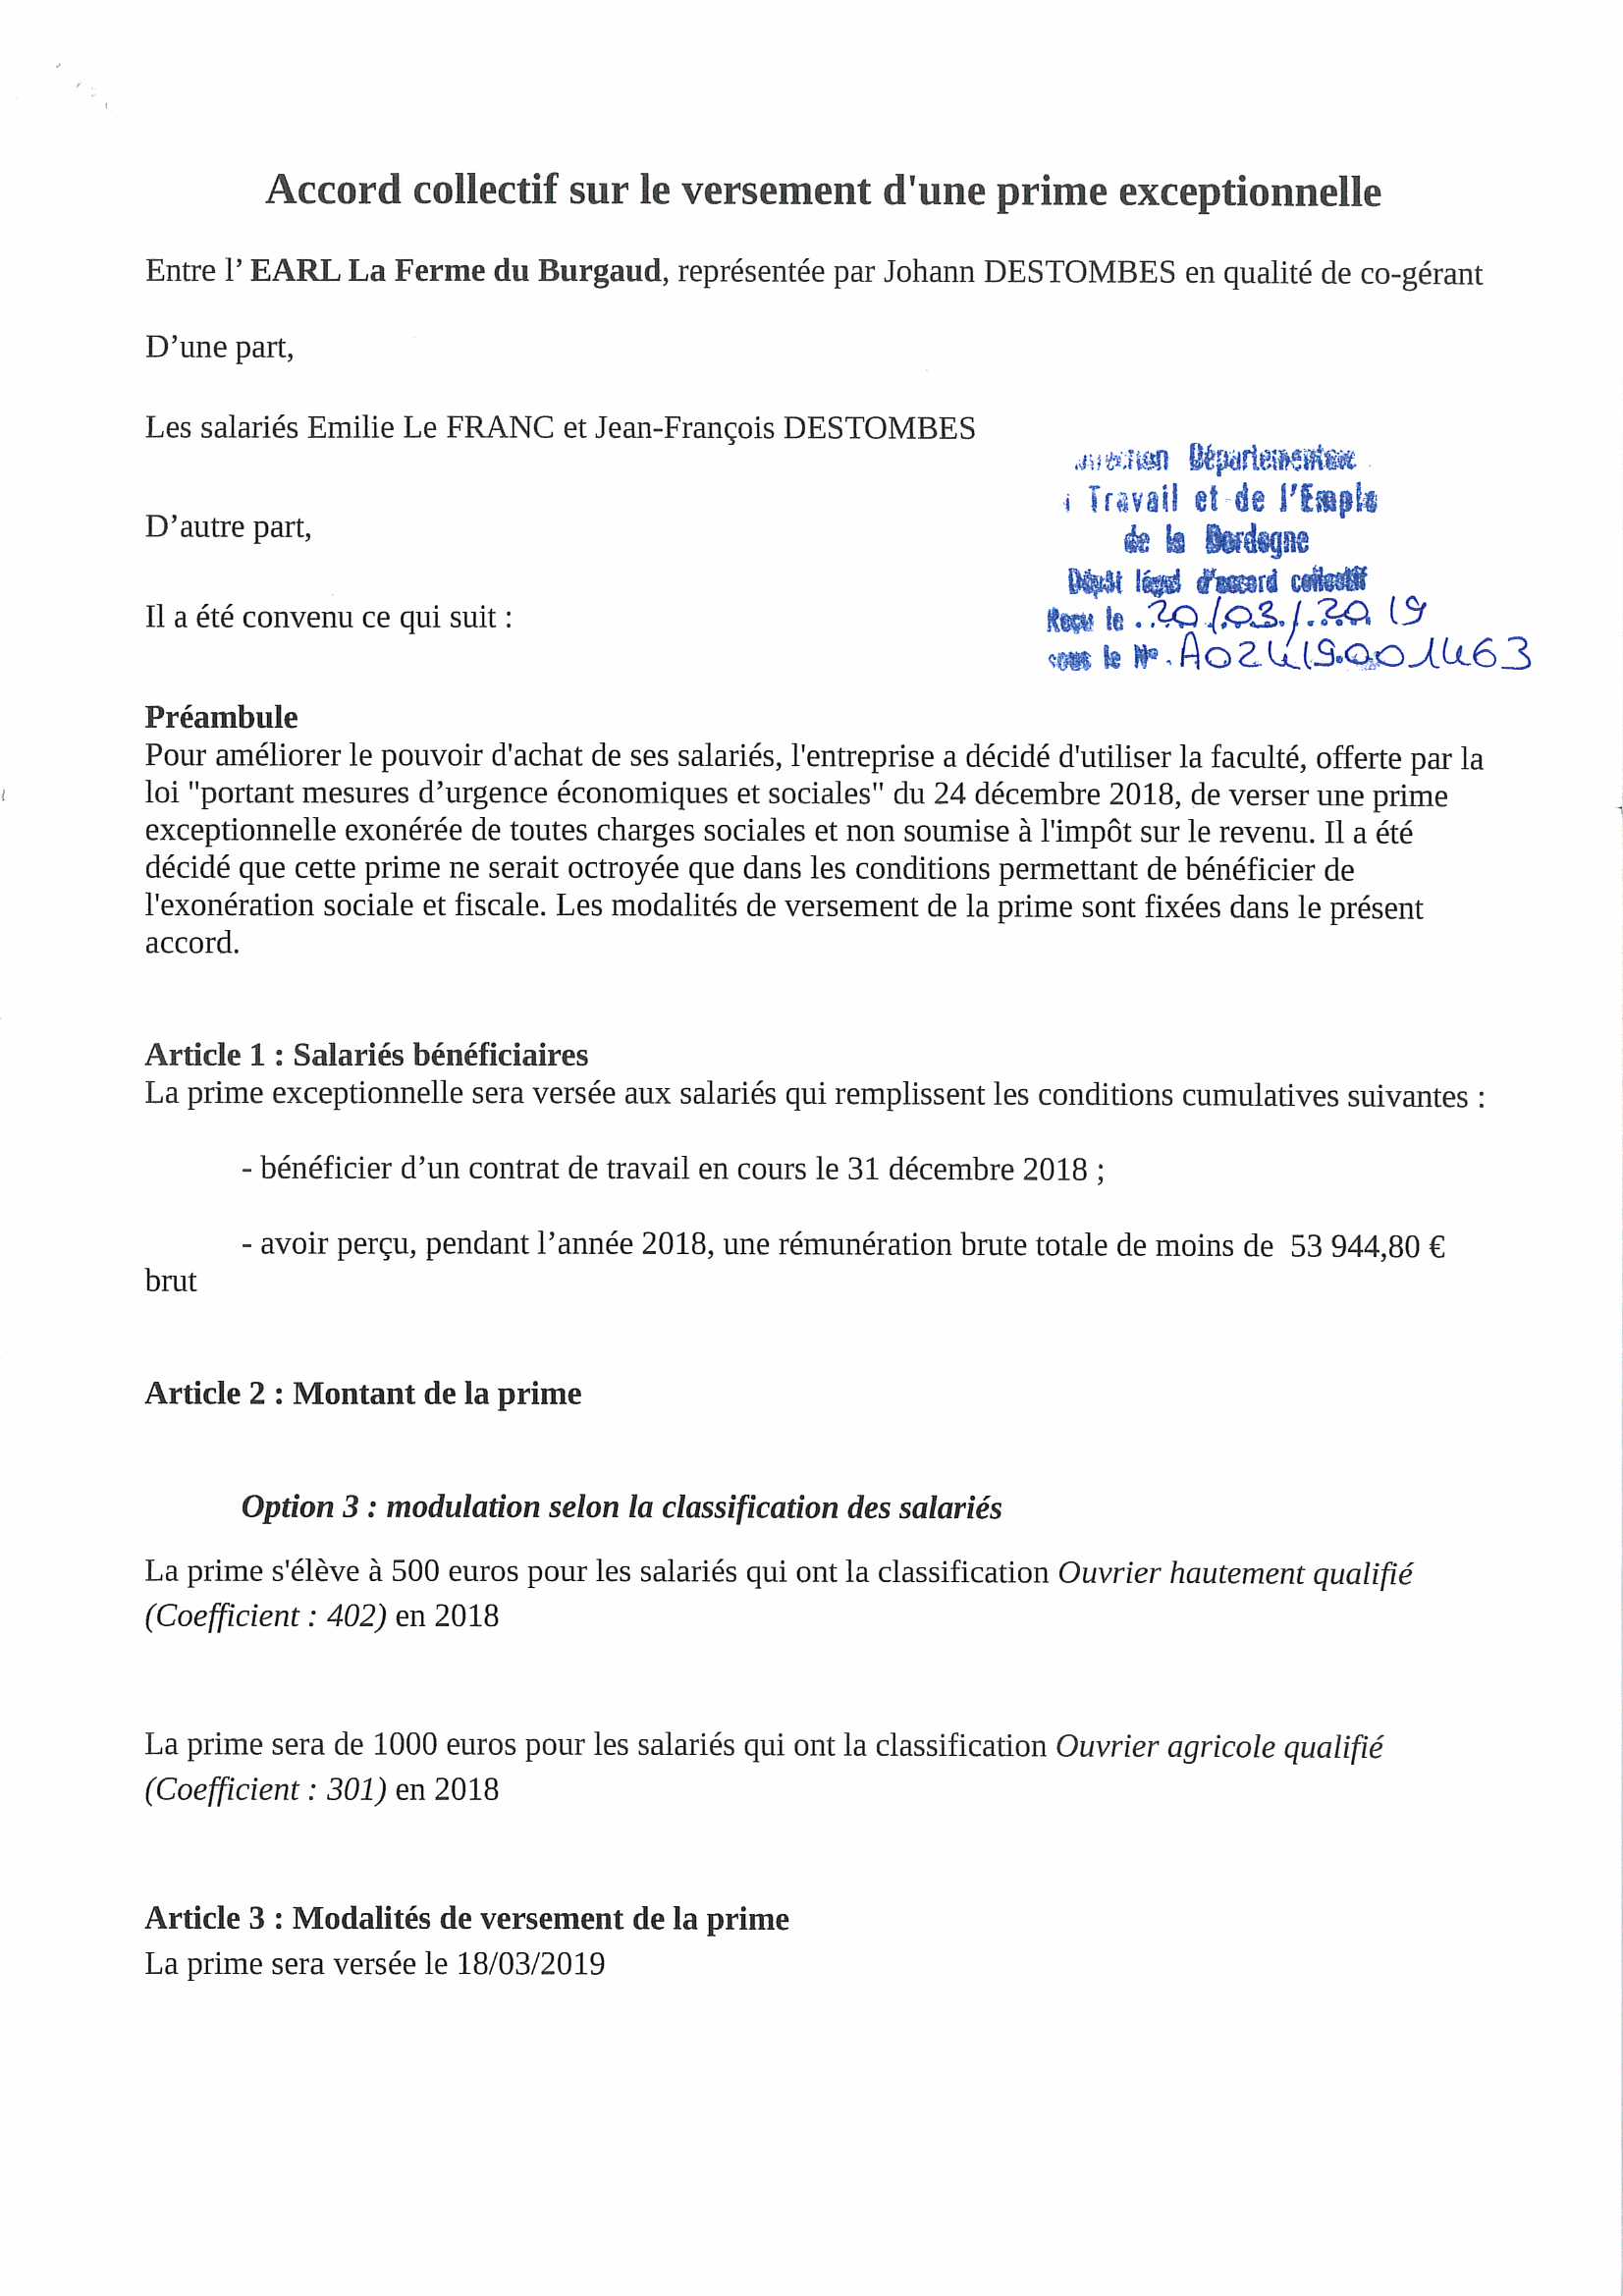 J:\POLE TRAVAIL\SCT\ACCORDS\Accords 2019\dossier en cours\burgaud1.jpg